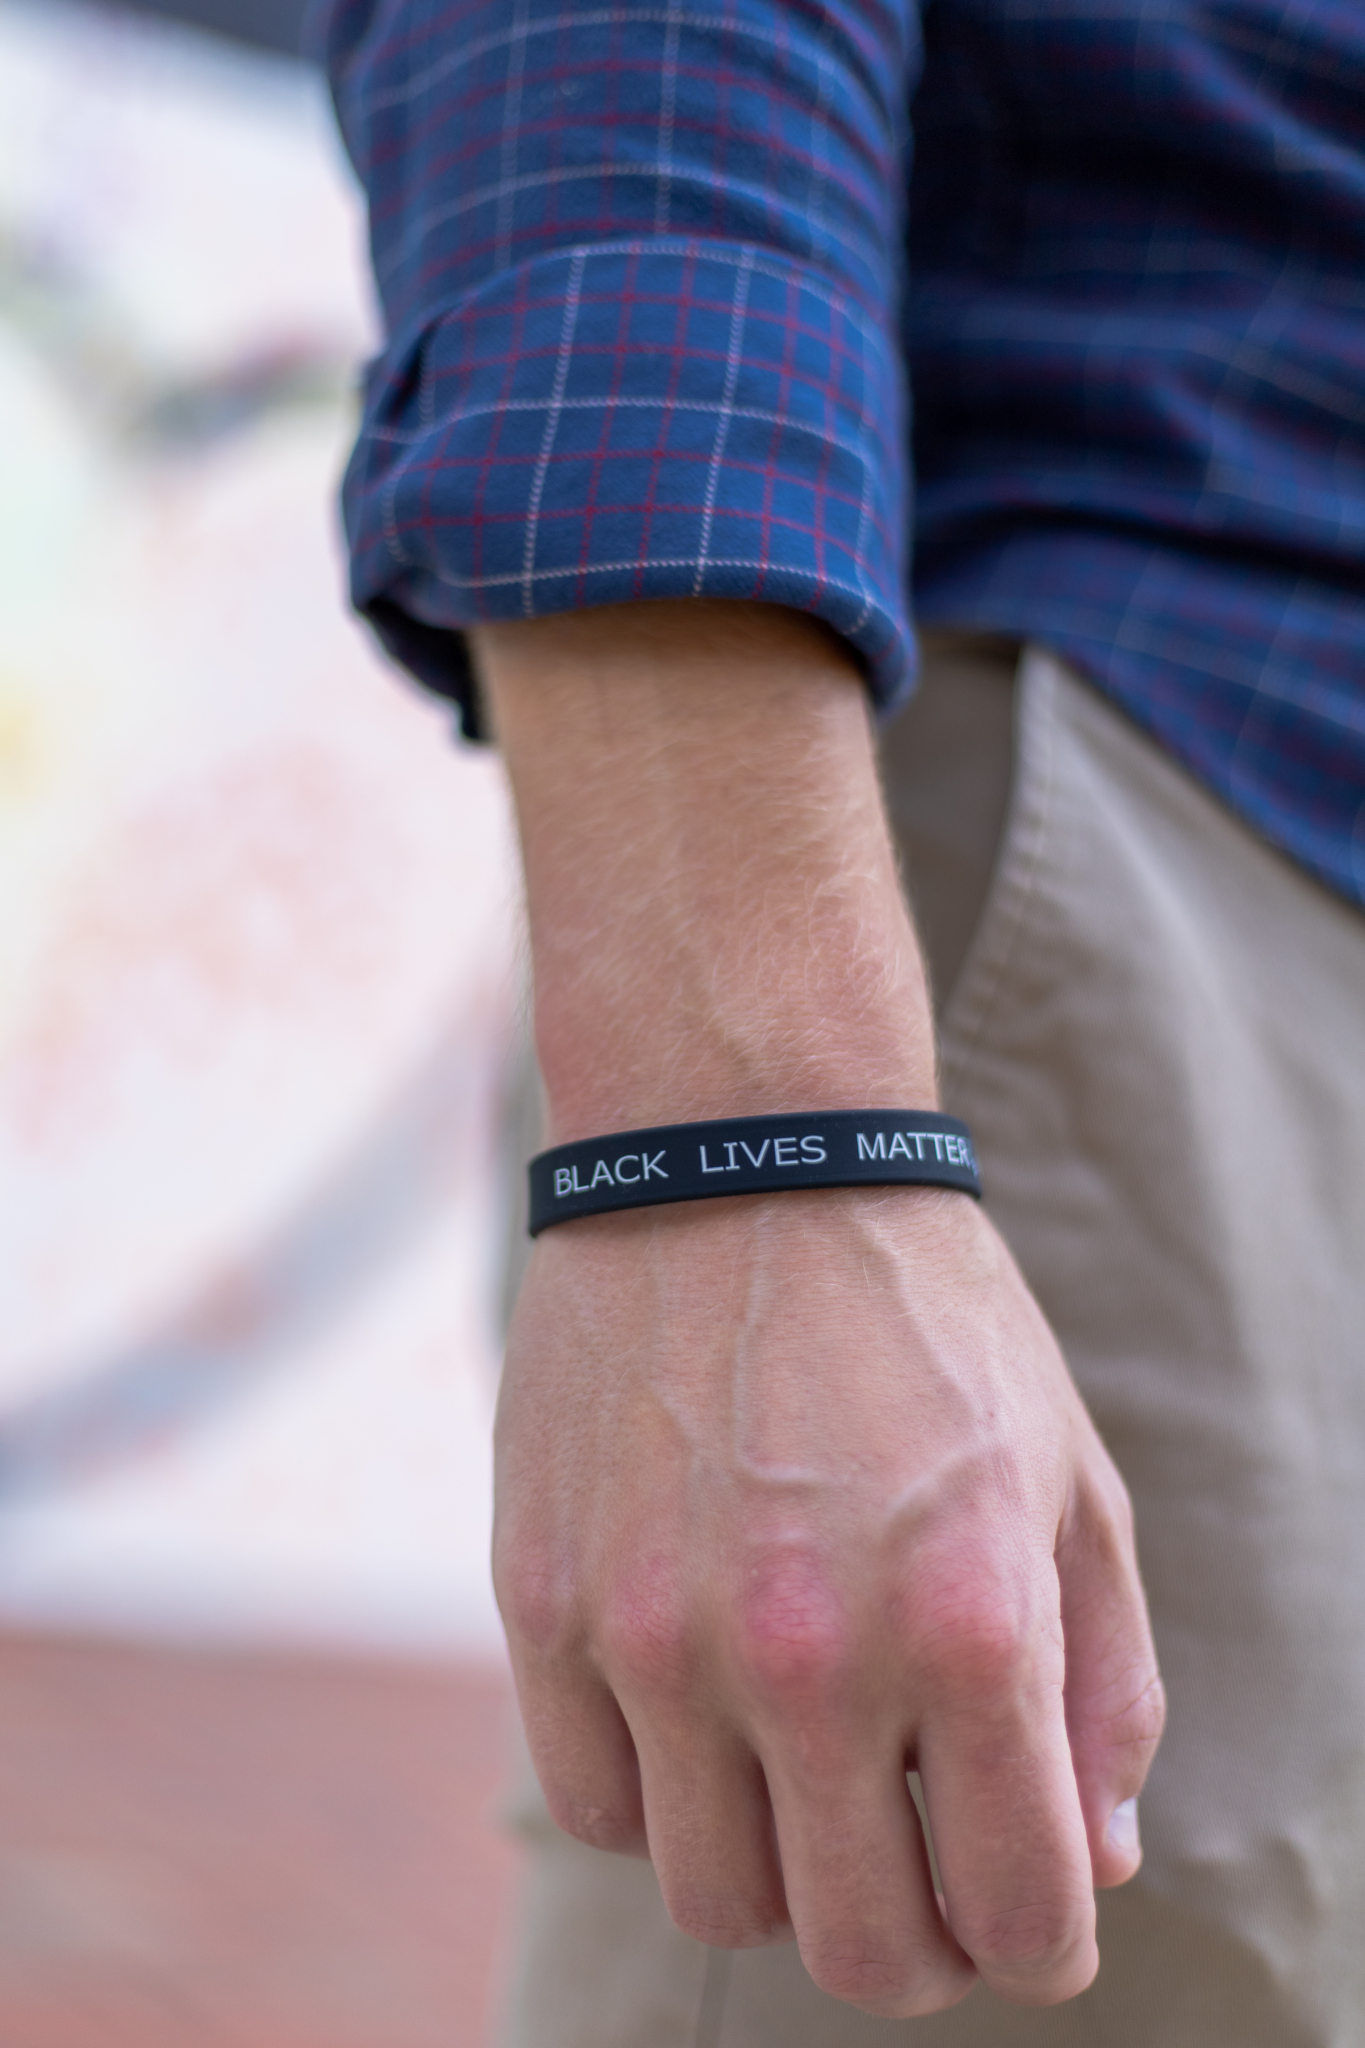 Linq 5691 Local tech startup launches $5 smart bracelet to share Black Lives Matter resources